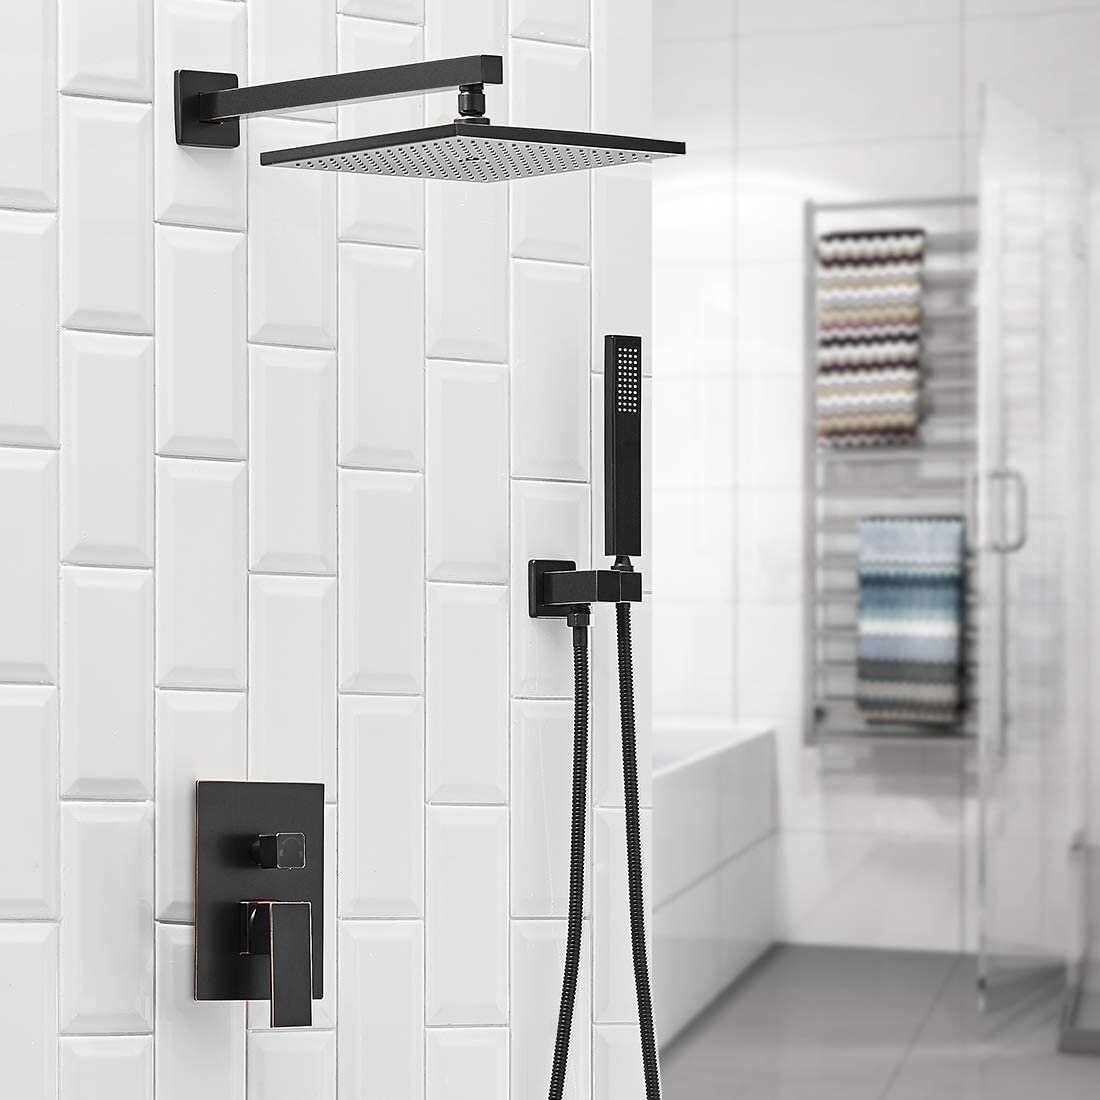 KOJOX Ceiling Oil Rubbed Bronze Shower System with 12 Inch Rain Shower head and Handheld Head Bathroom Shower Faucet Set Trim Kit with Valve Combo